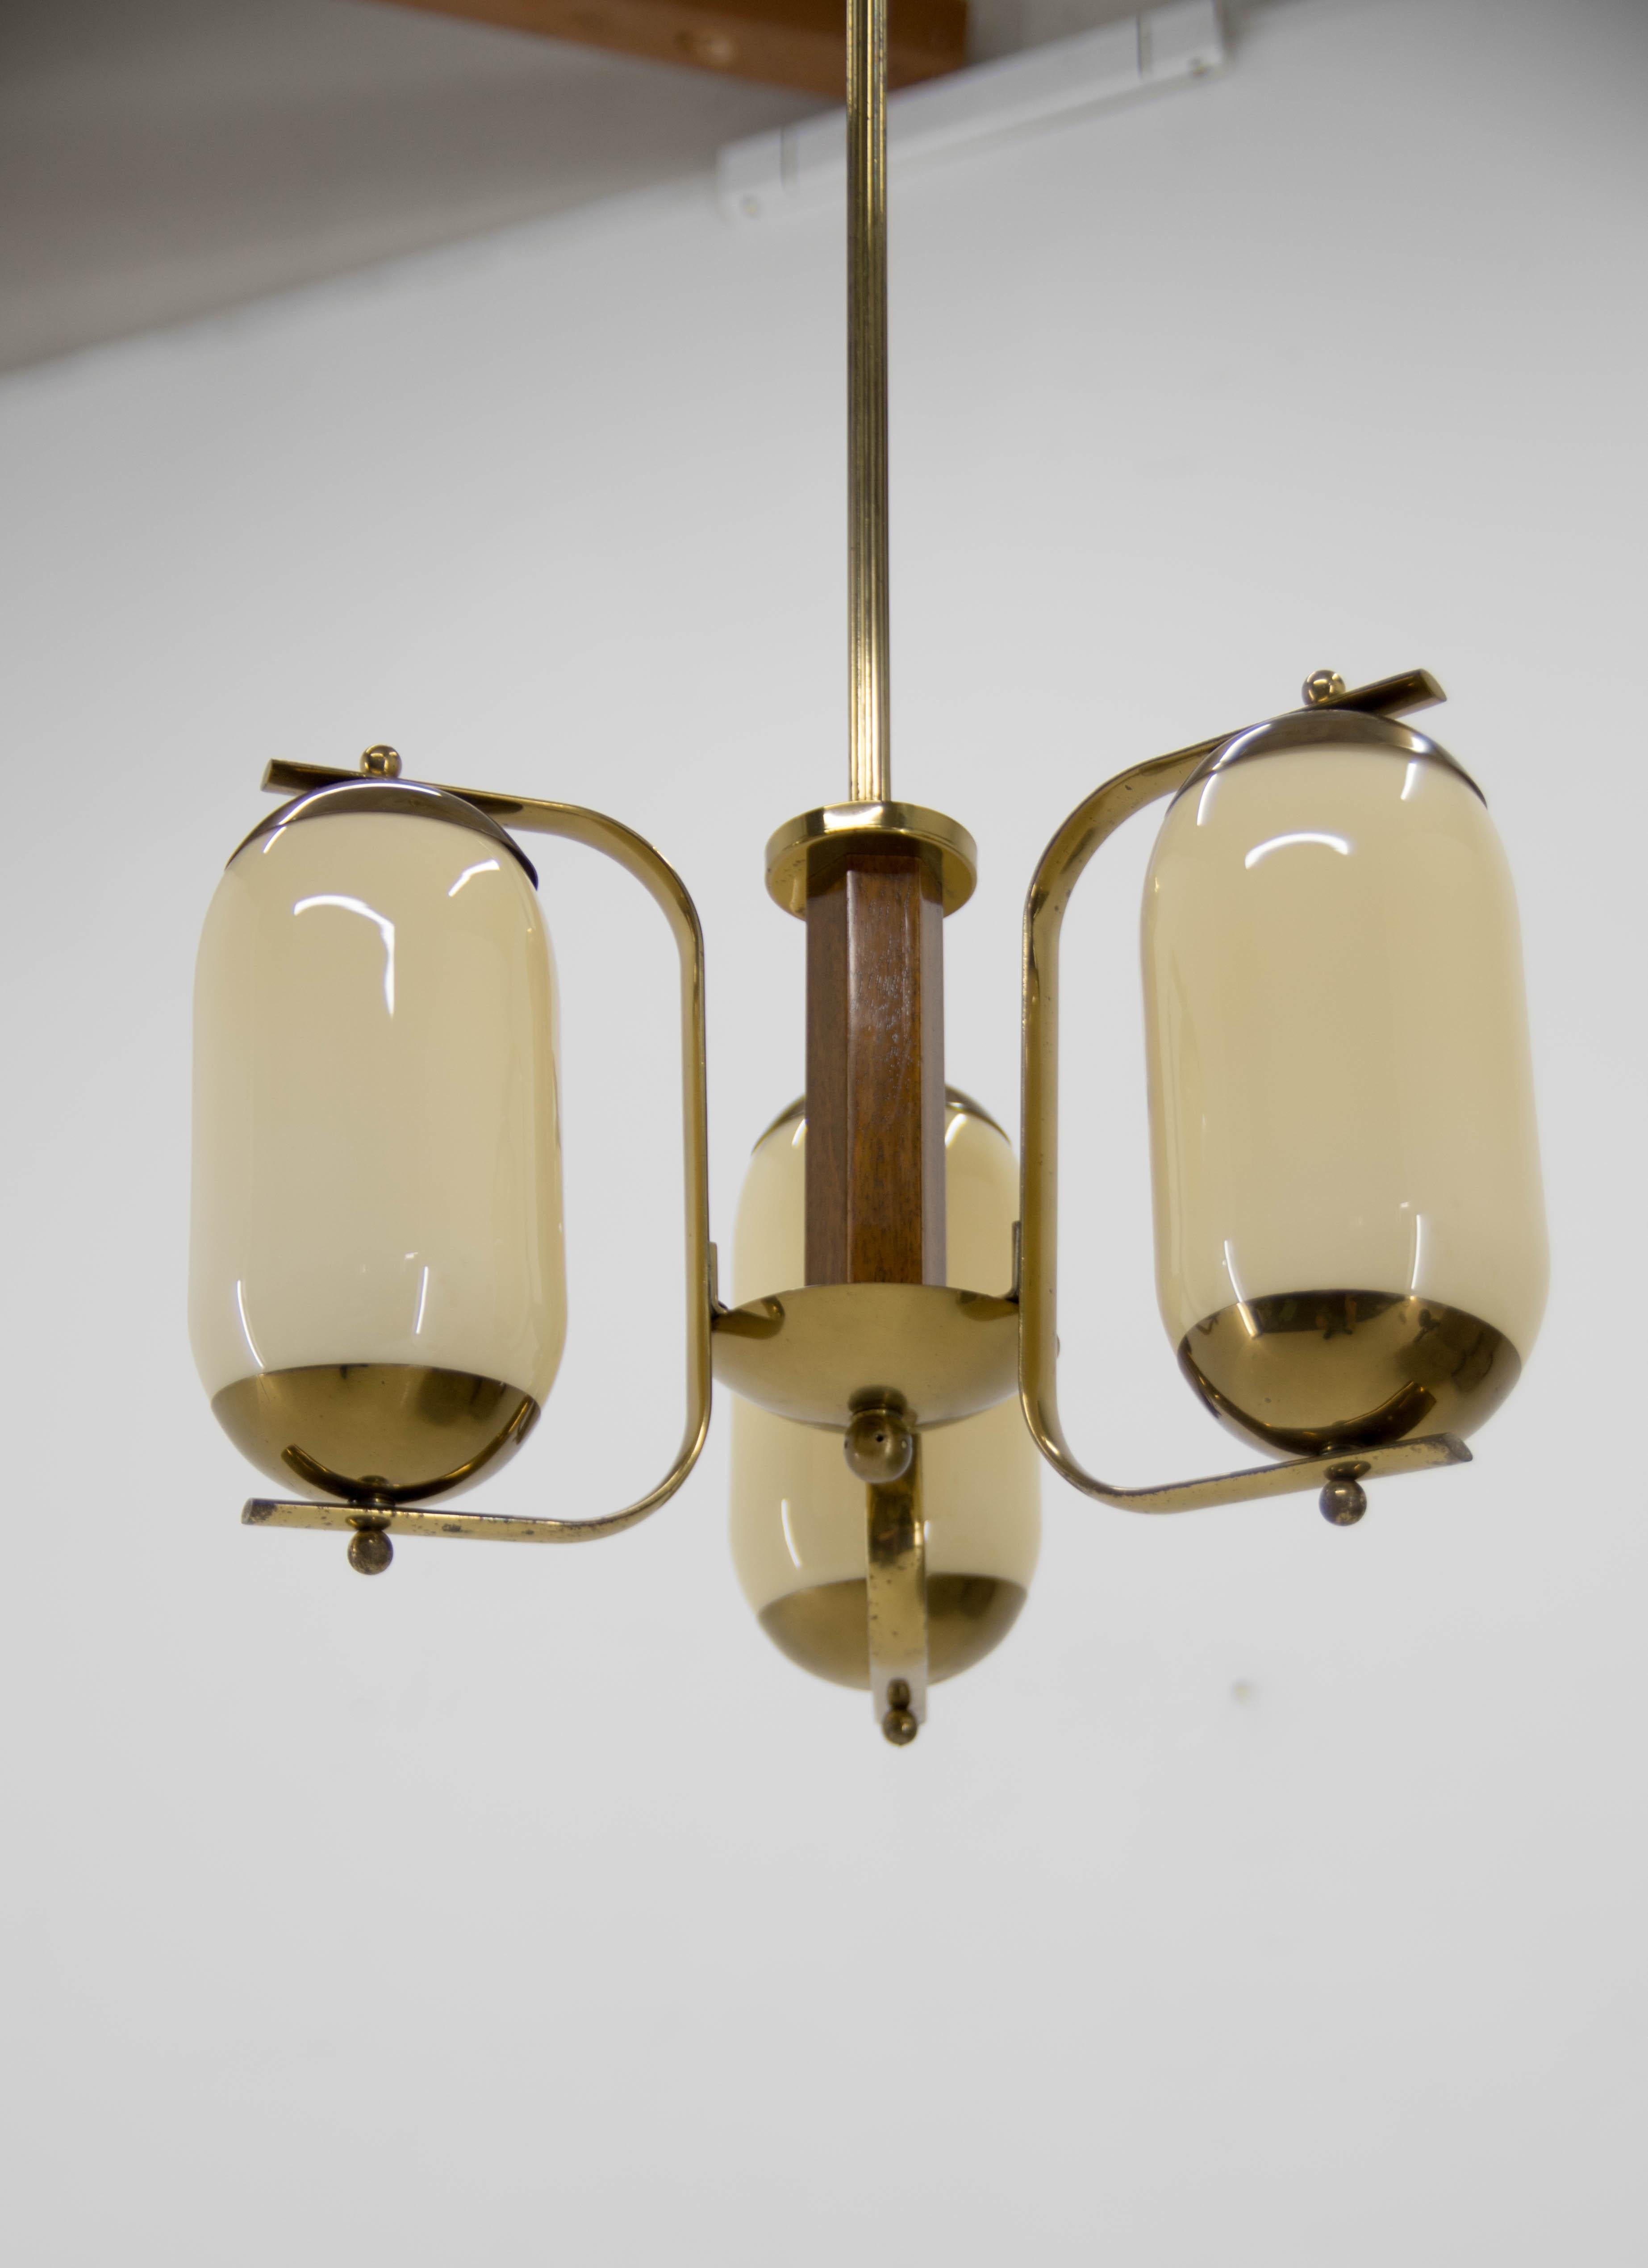 Unusual Art Deco chandelier made of brass, glass and wood.
Cleaned, polished, rewired.
Central rod can be shorten on request.
3x40W, E25-E27 bulbs
US wiring compatible